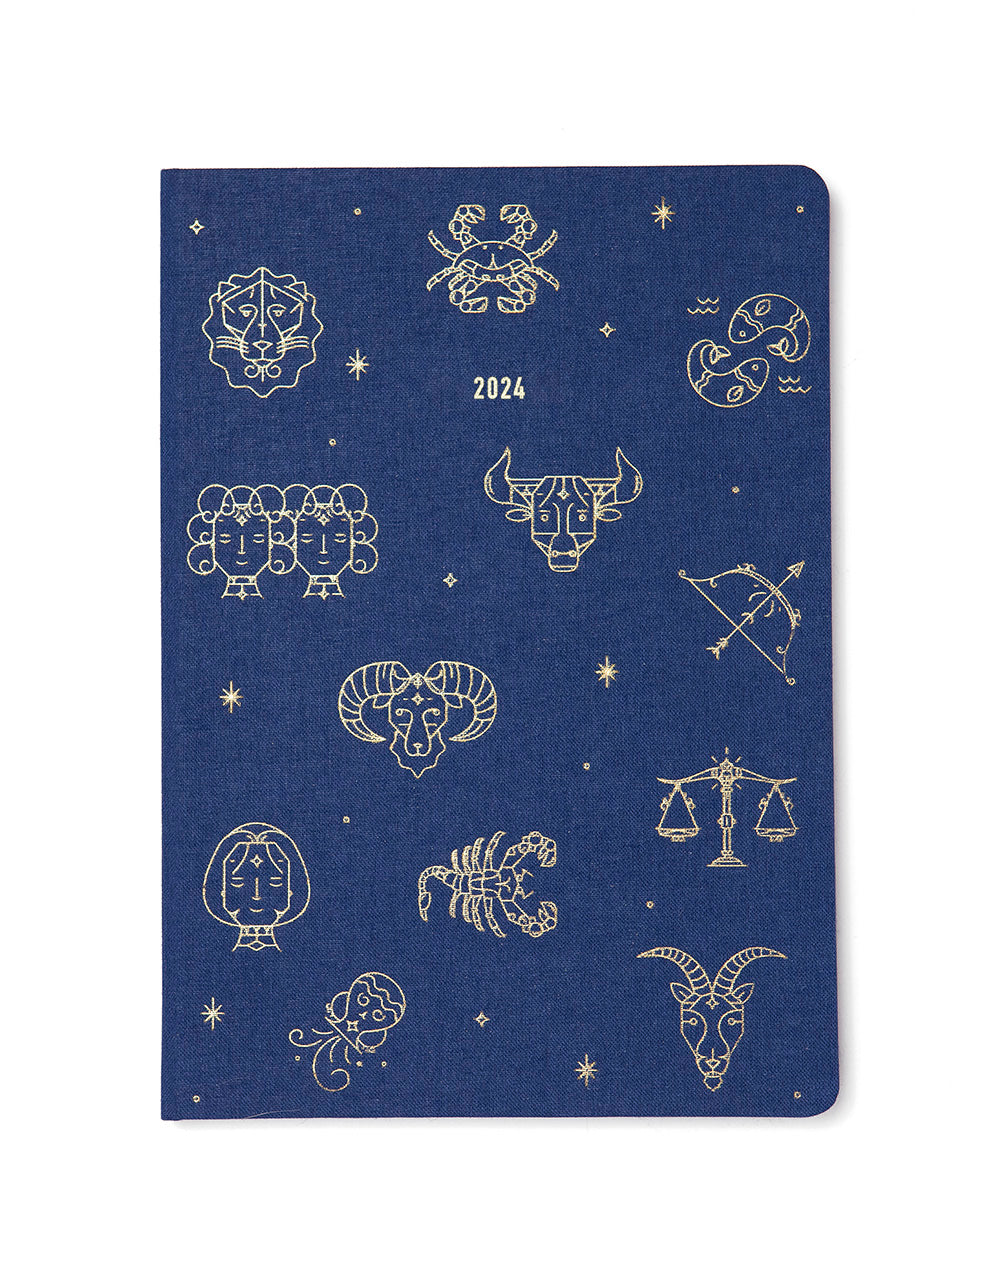 Zodiac A5 Week to View Planner 2024 - Multilanguage